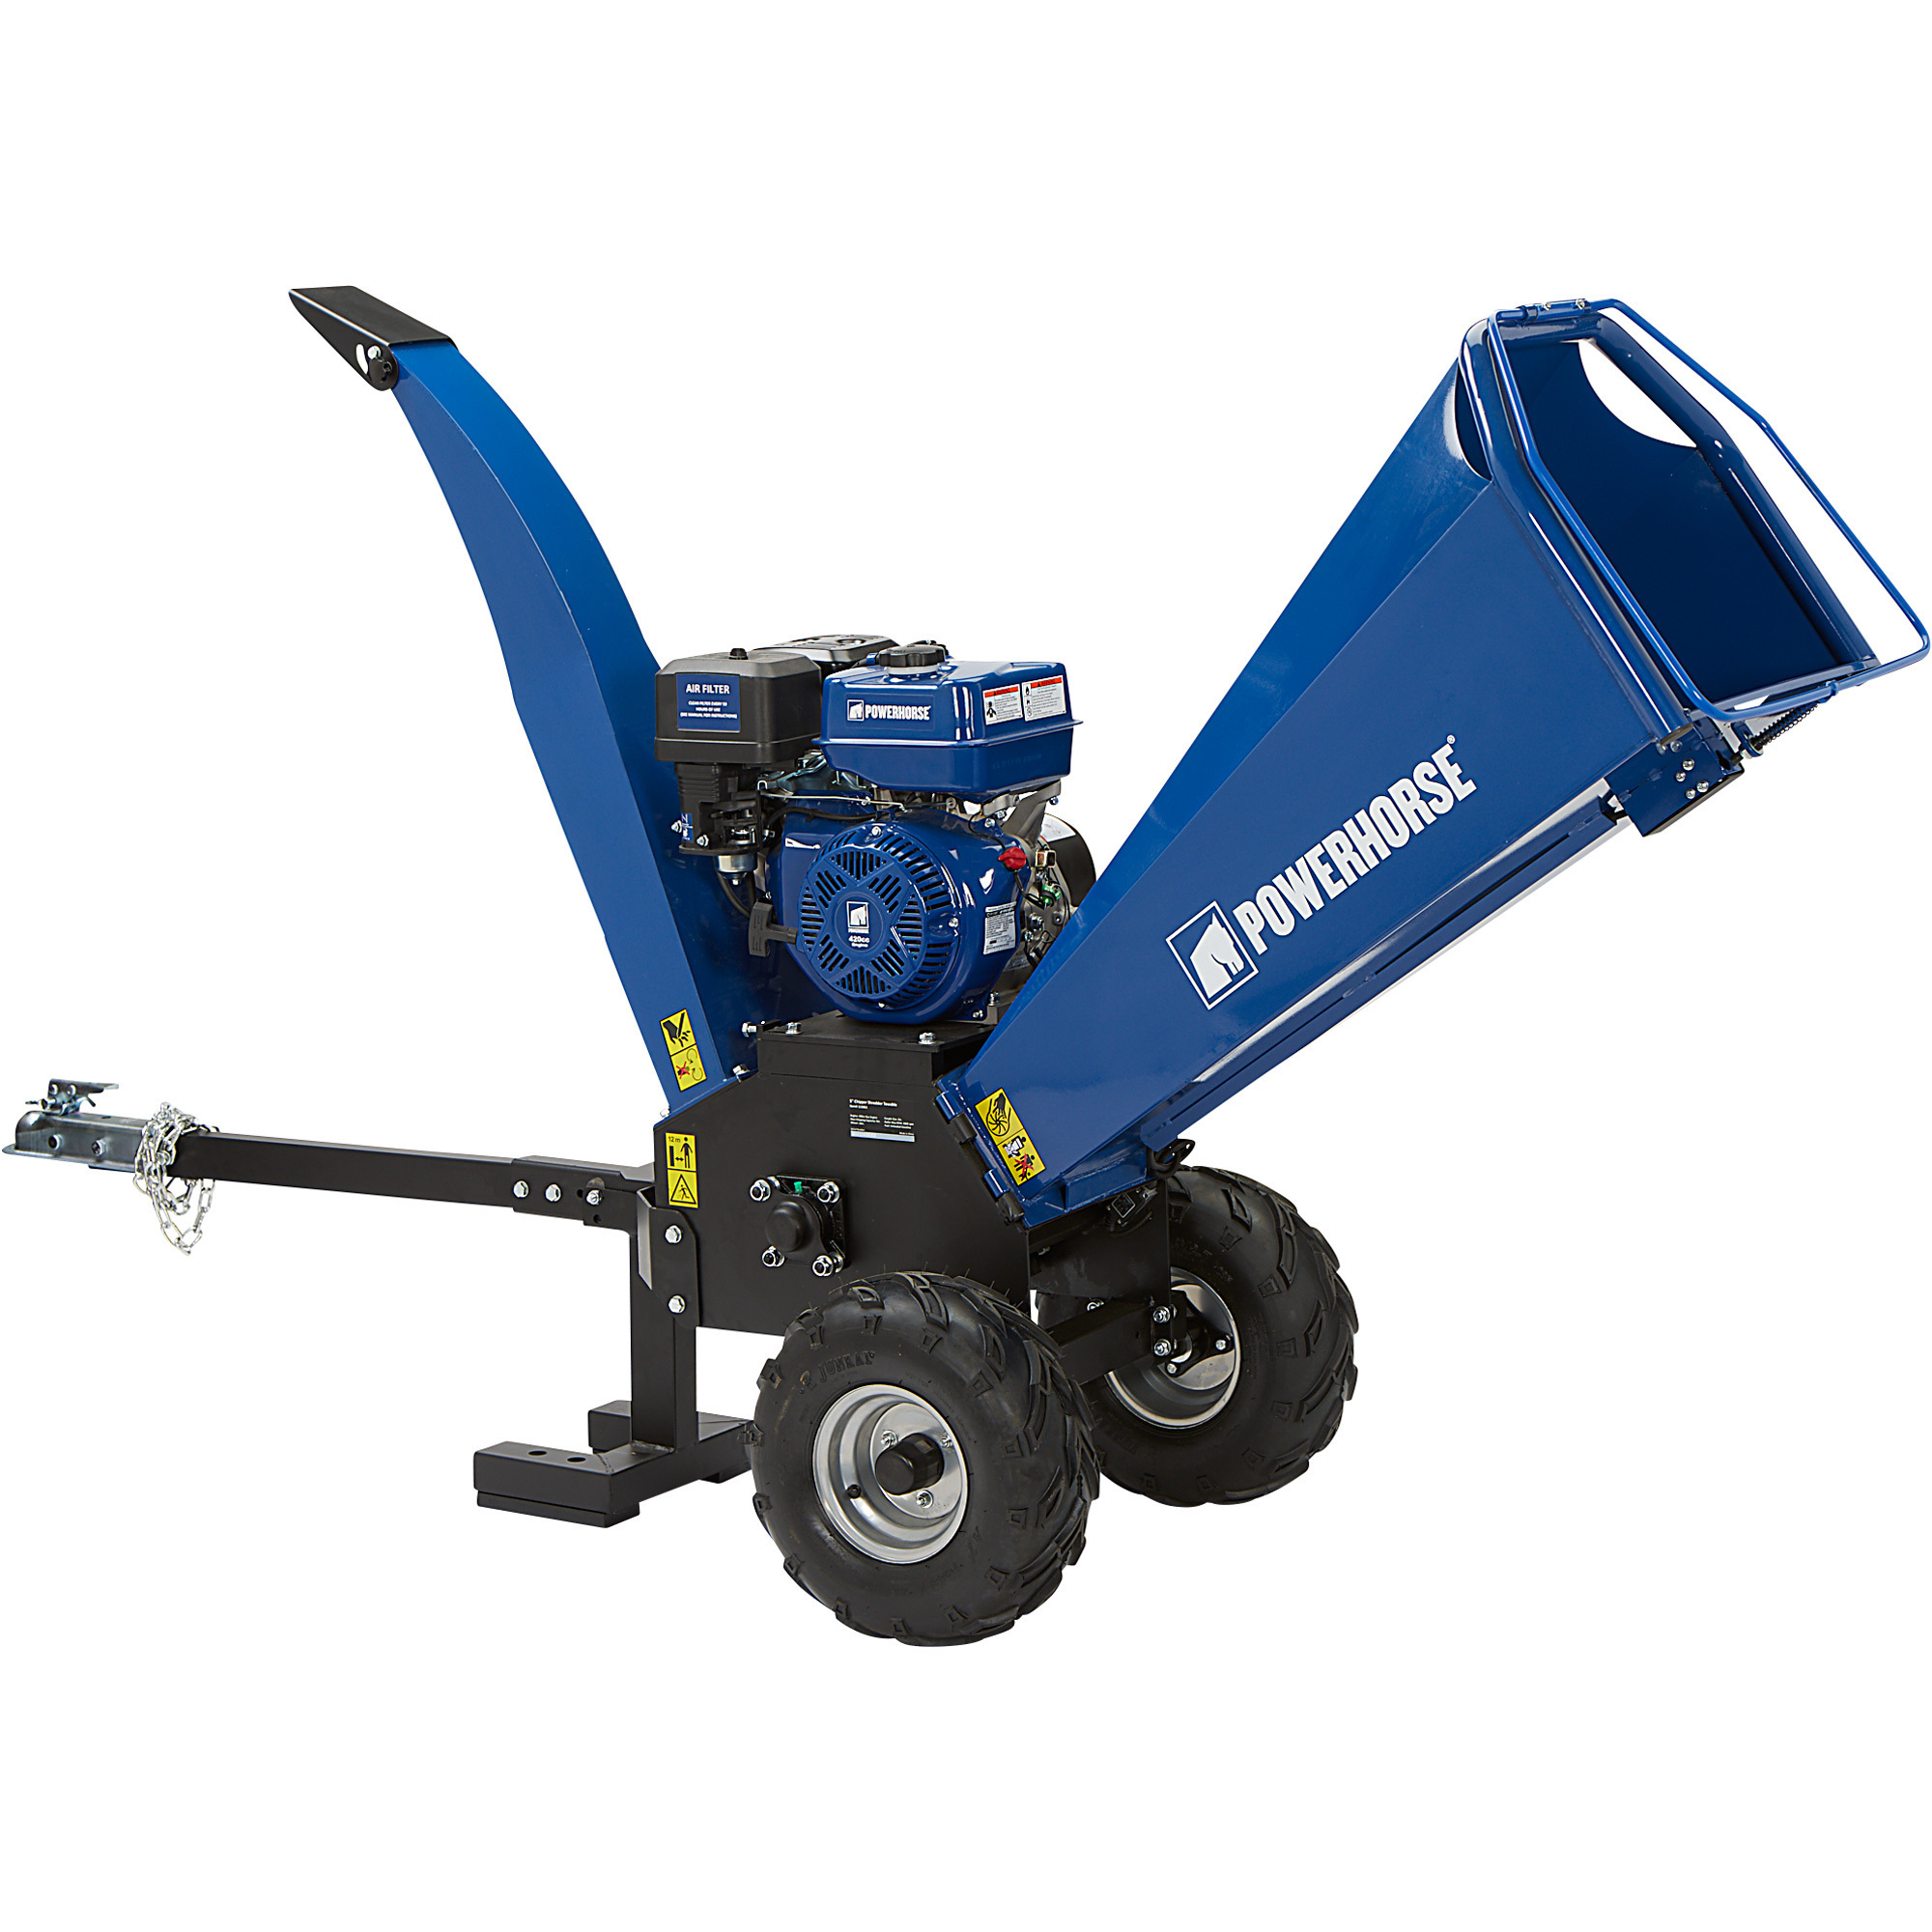 Powerhorse Towable Wood Chipper + Shredder, 420cc OHV Engine, 5Inch Chipping Capacity